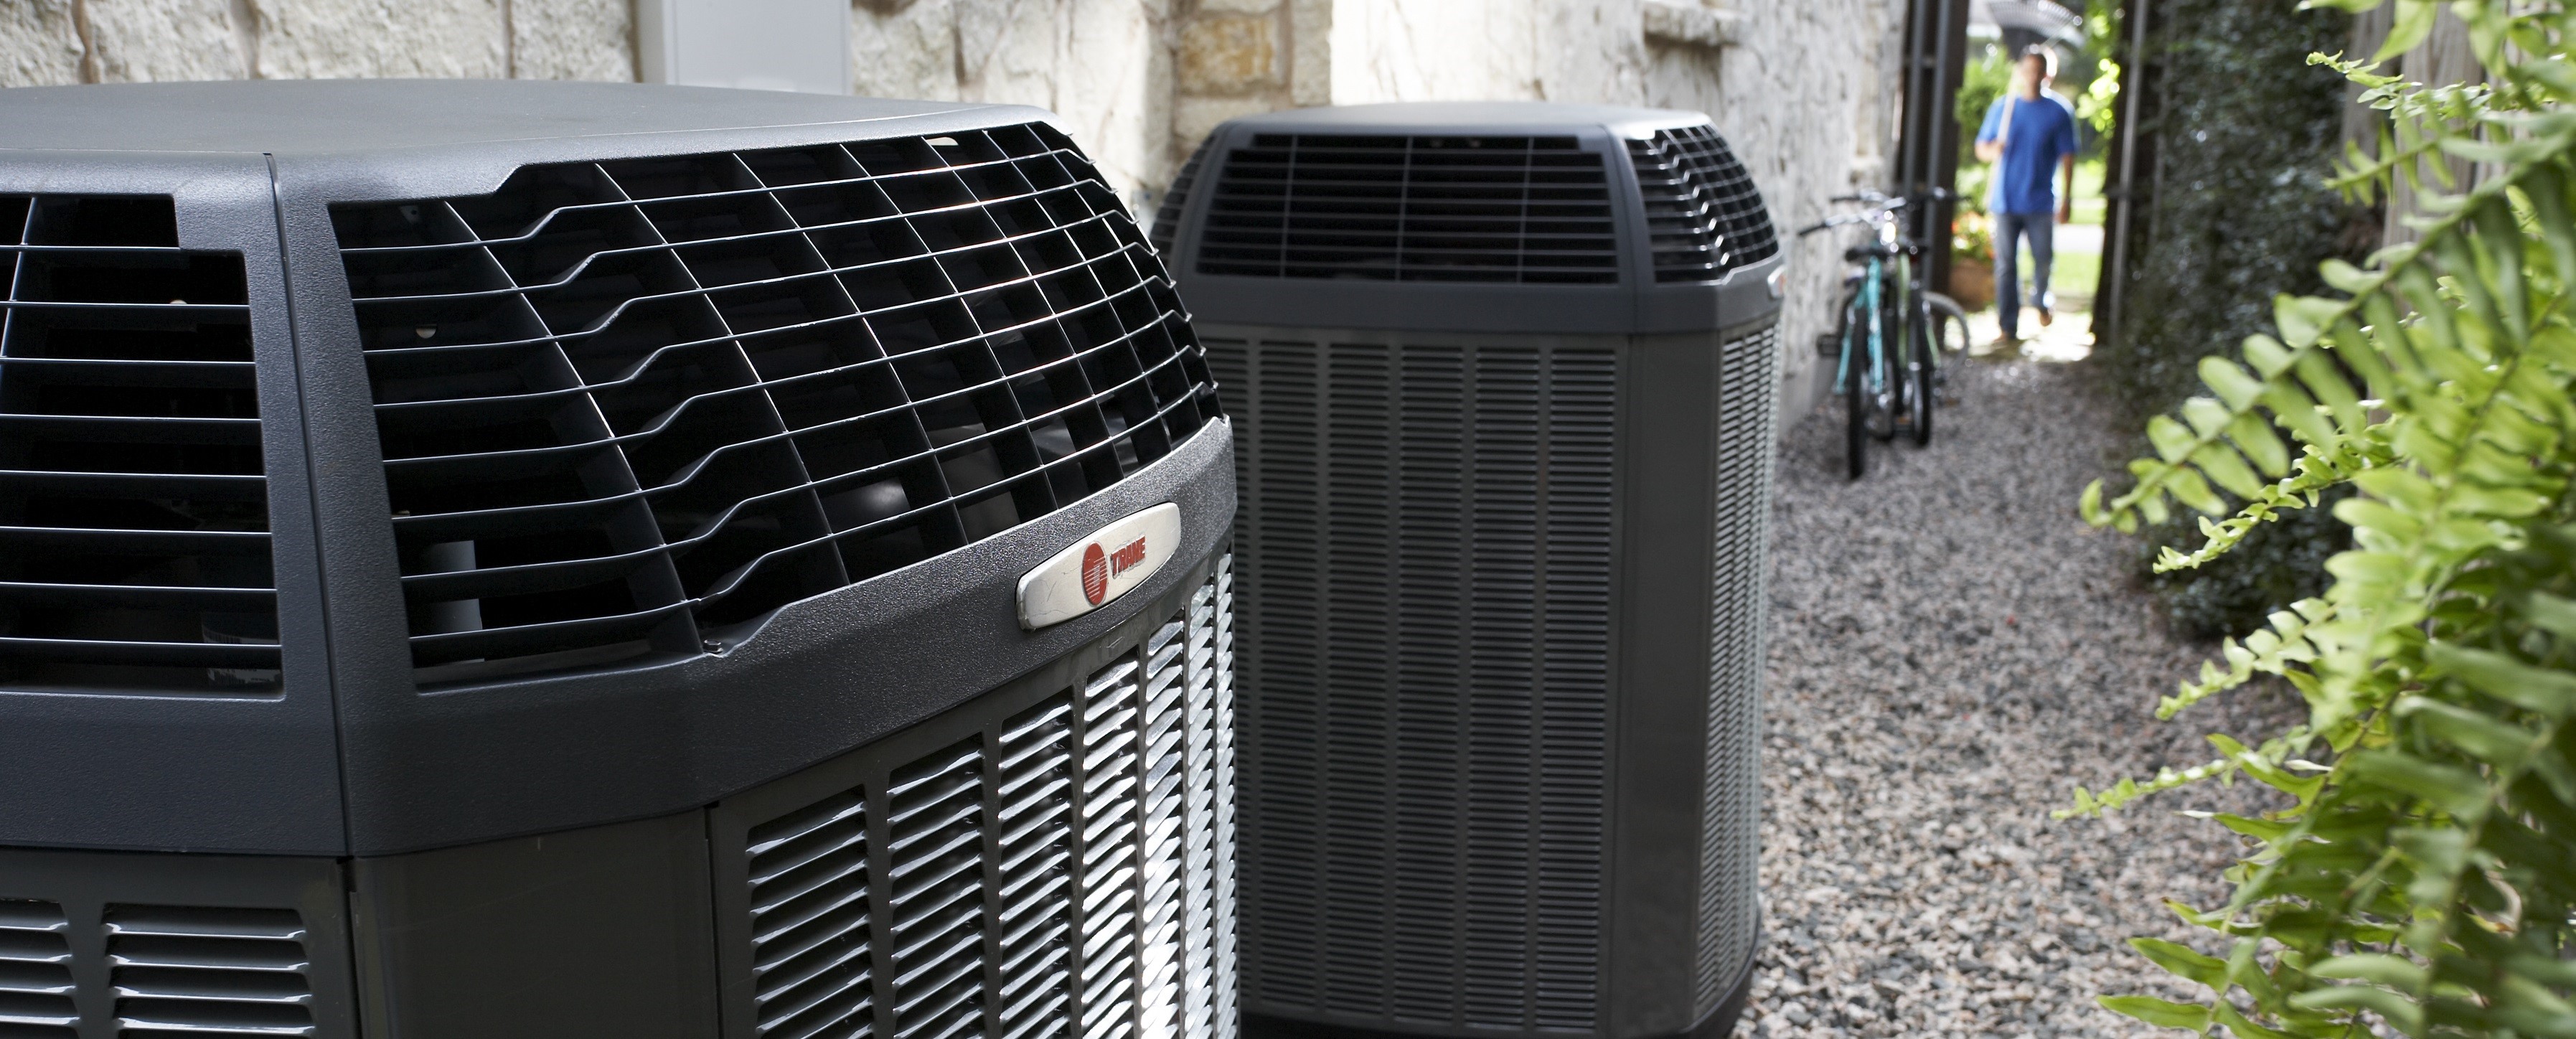 Heating And Air Conditioning Companies Nearby